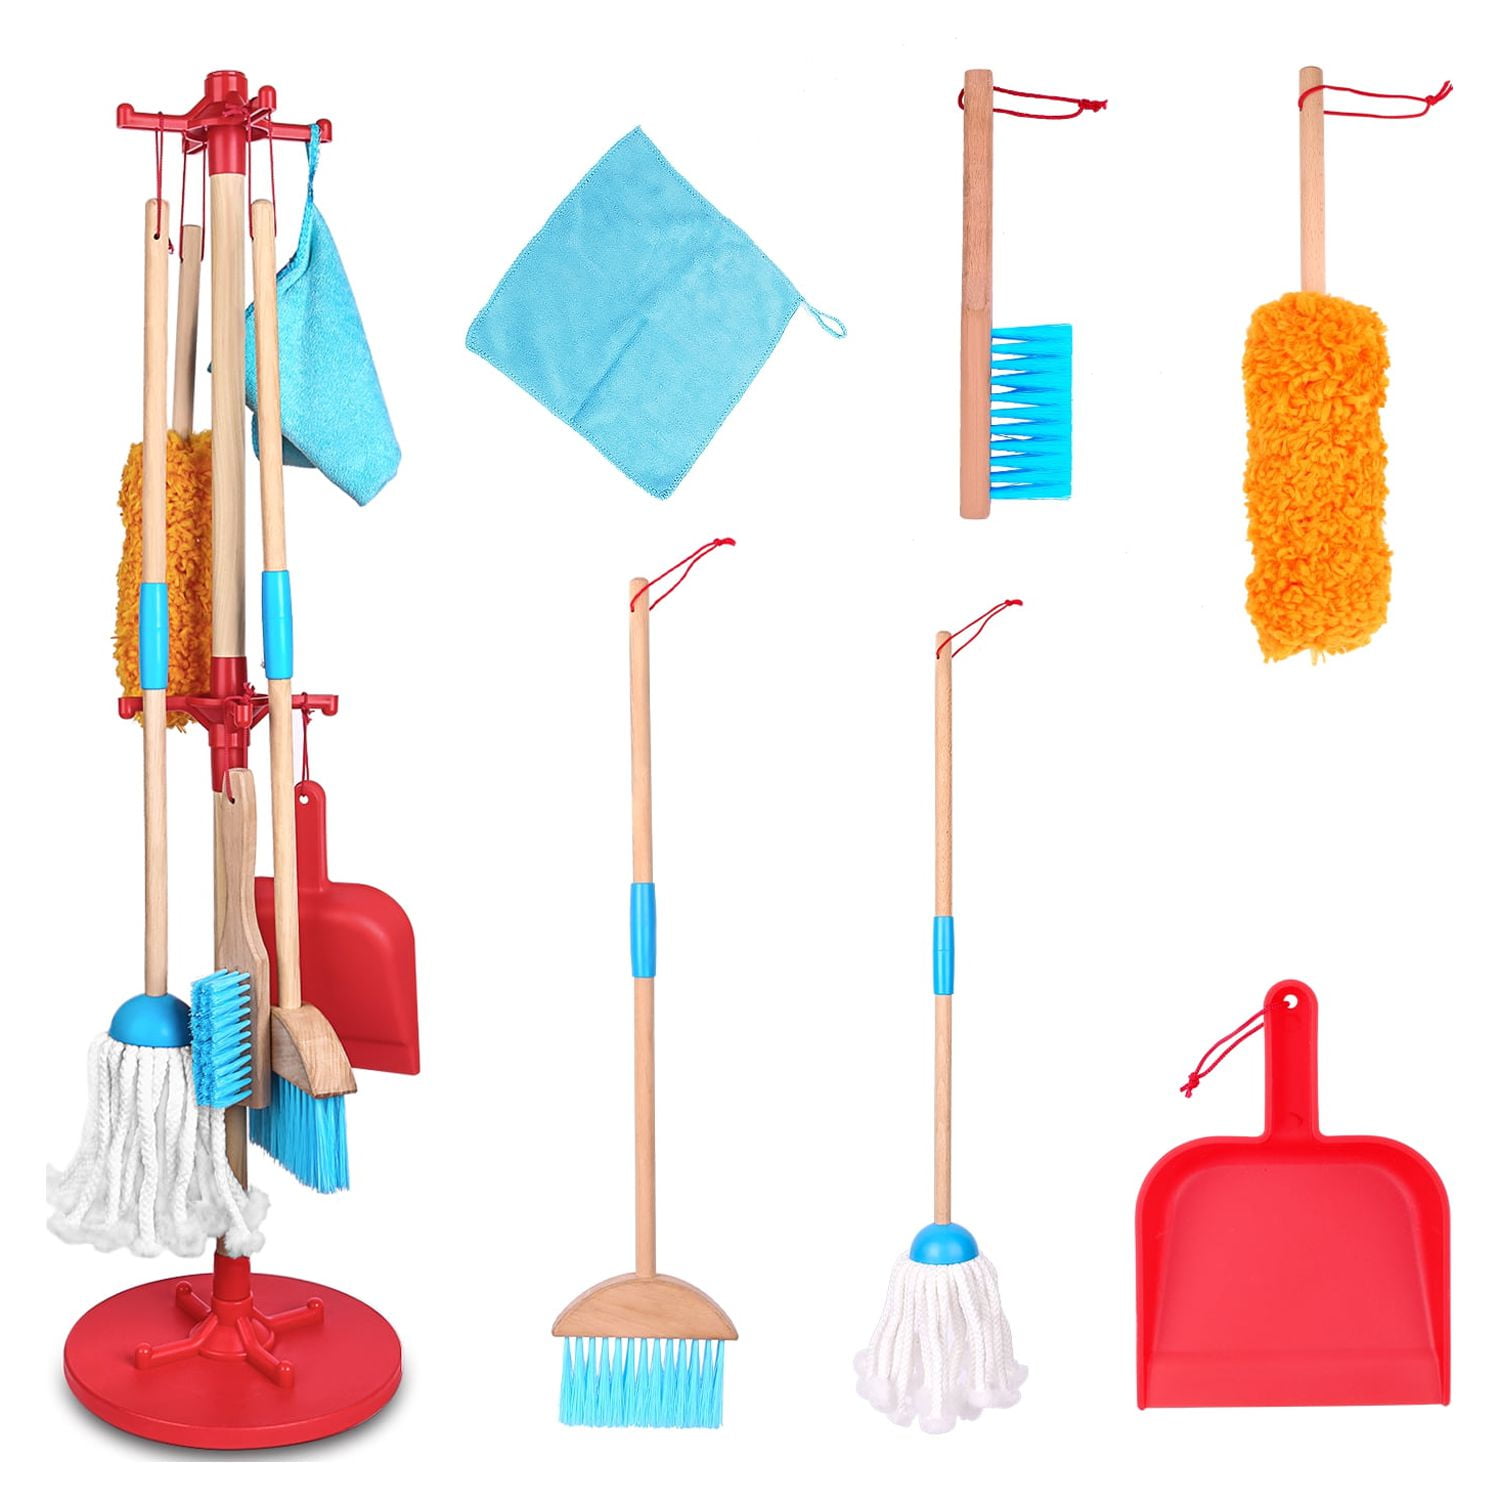  FOPNETS Kids Cleaning Set Toys 7 Piece Cleaning Toys for  Toddlers Pretend Play Cleaning Tools for Kids Wooden Detachable  Housekeeping Broom Dustpan Duster Brush Mop : Toys & Games